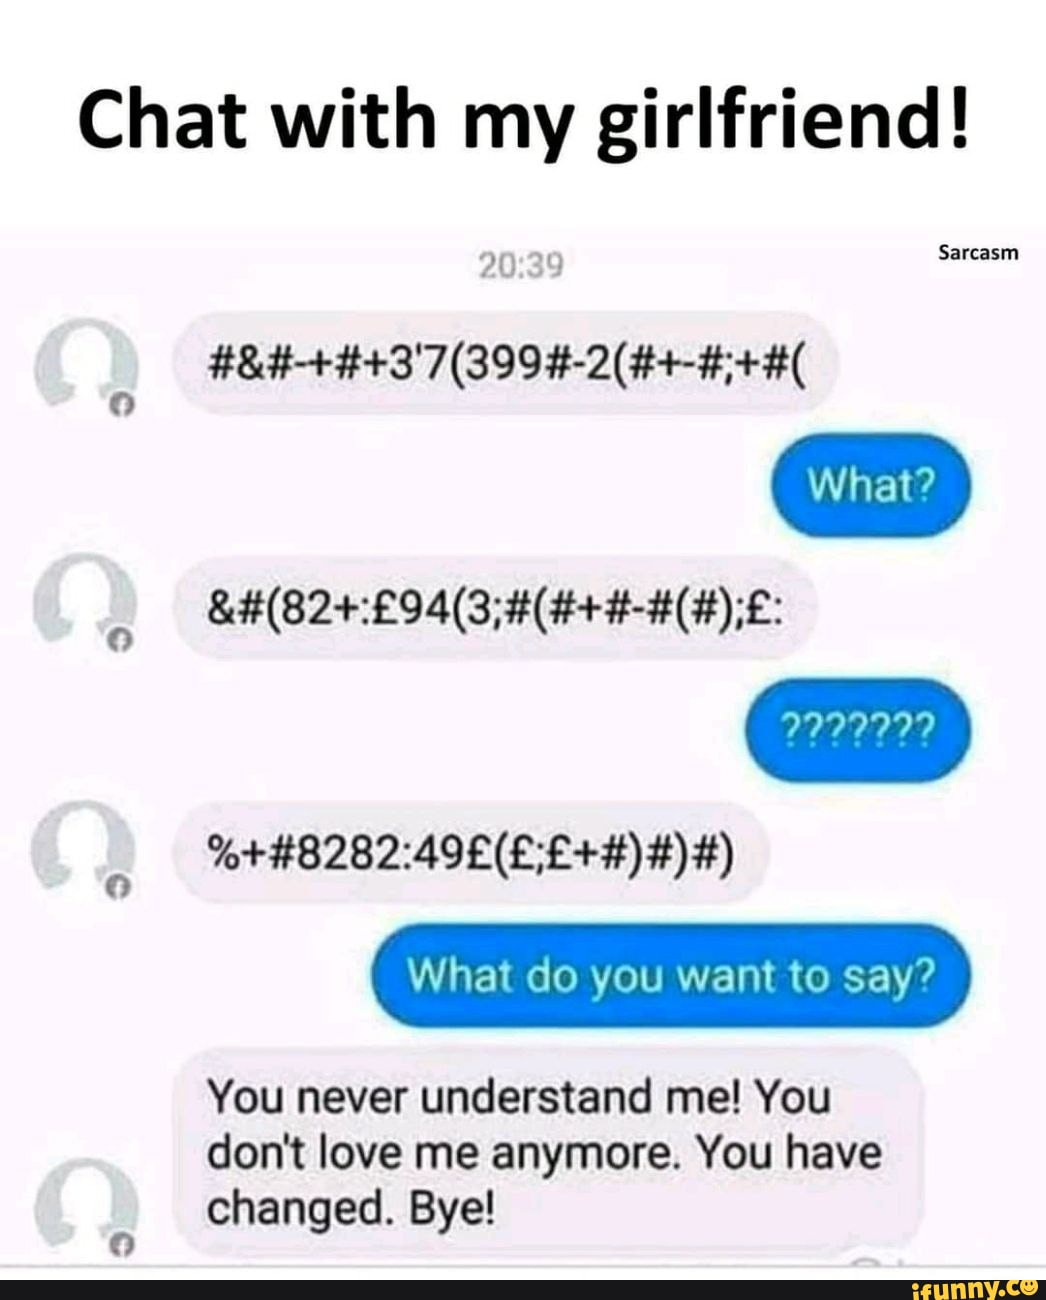 What to chat with girlfriend